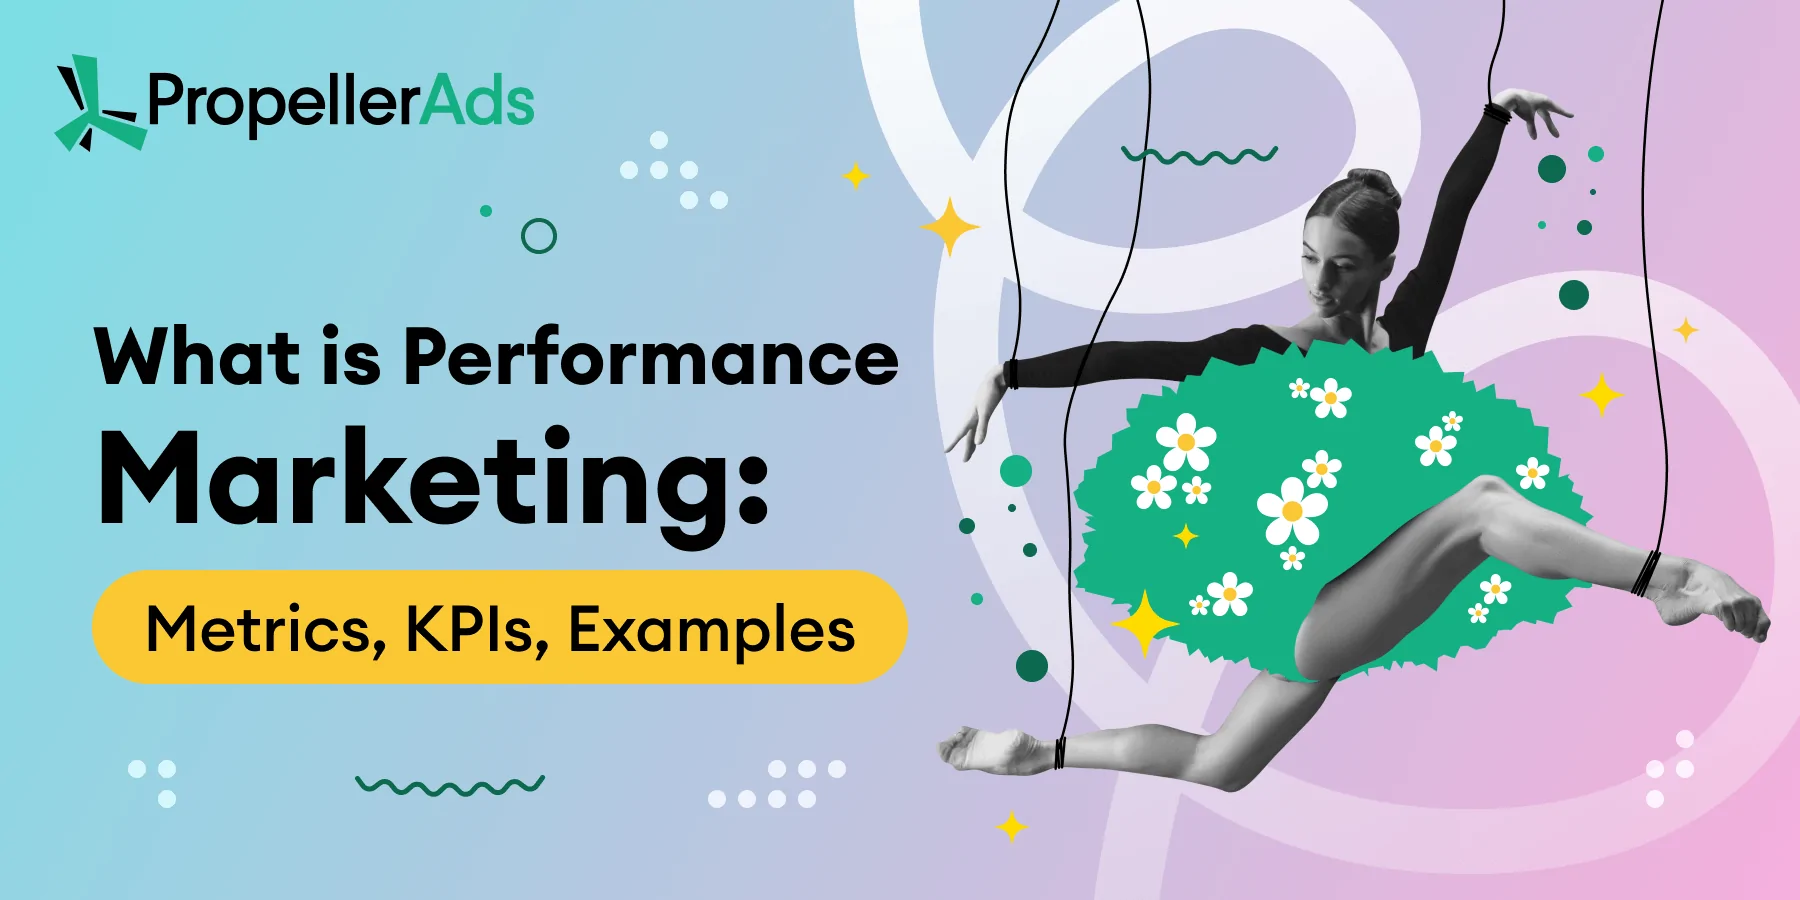 Performance marketing guide from PropellerAds